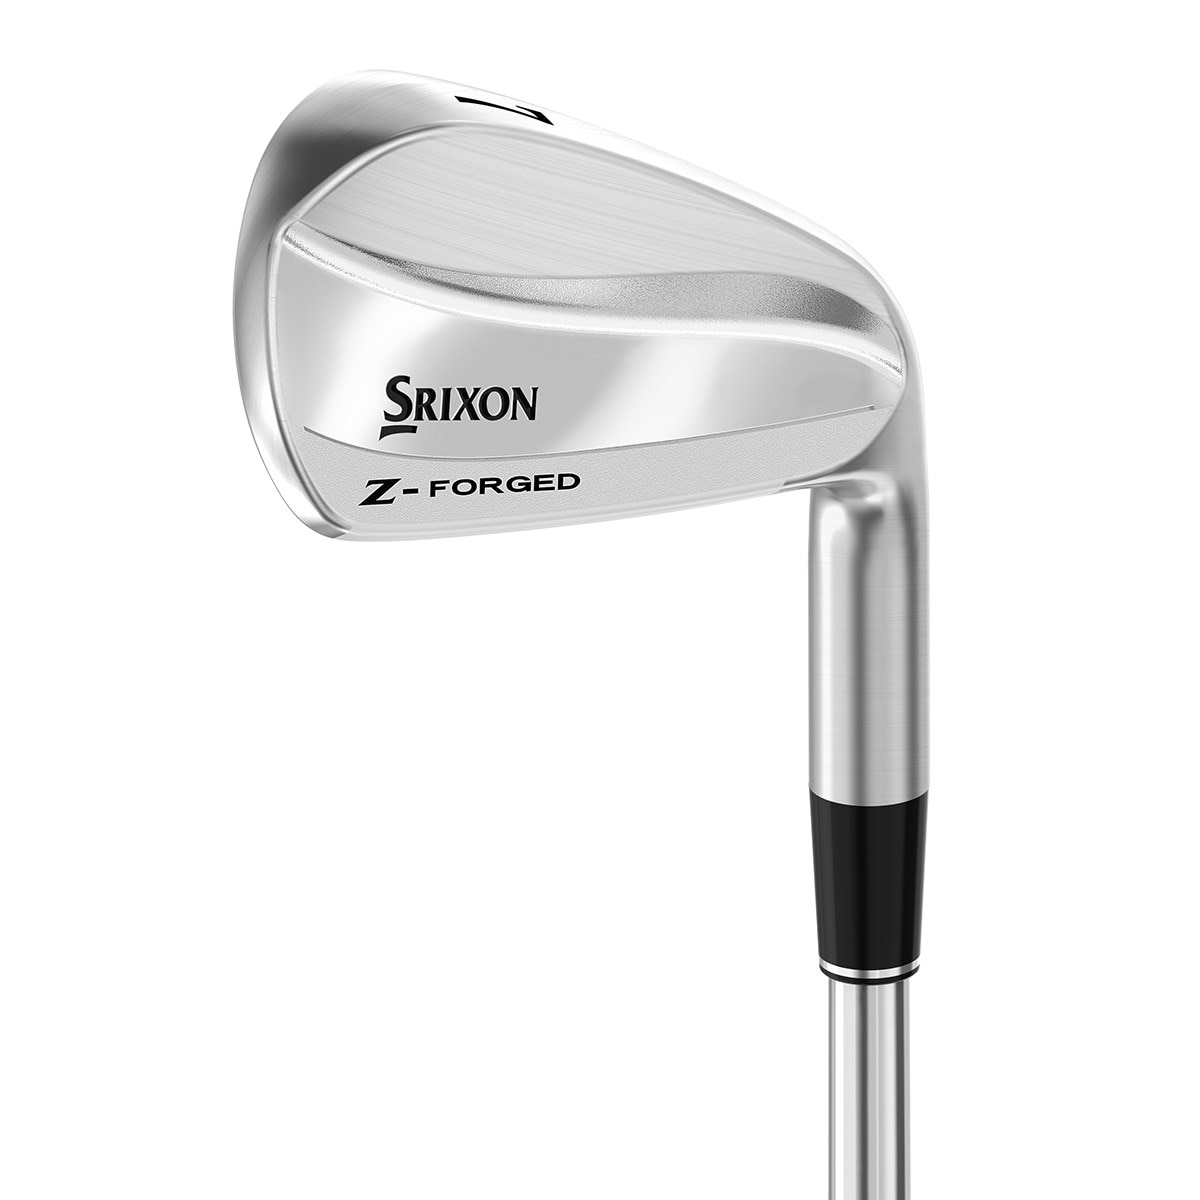 SRIXON Z-FORGED アイアン(6本セット) N.S.PRO MODUS3 TOUR 120(アイアンセット)